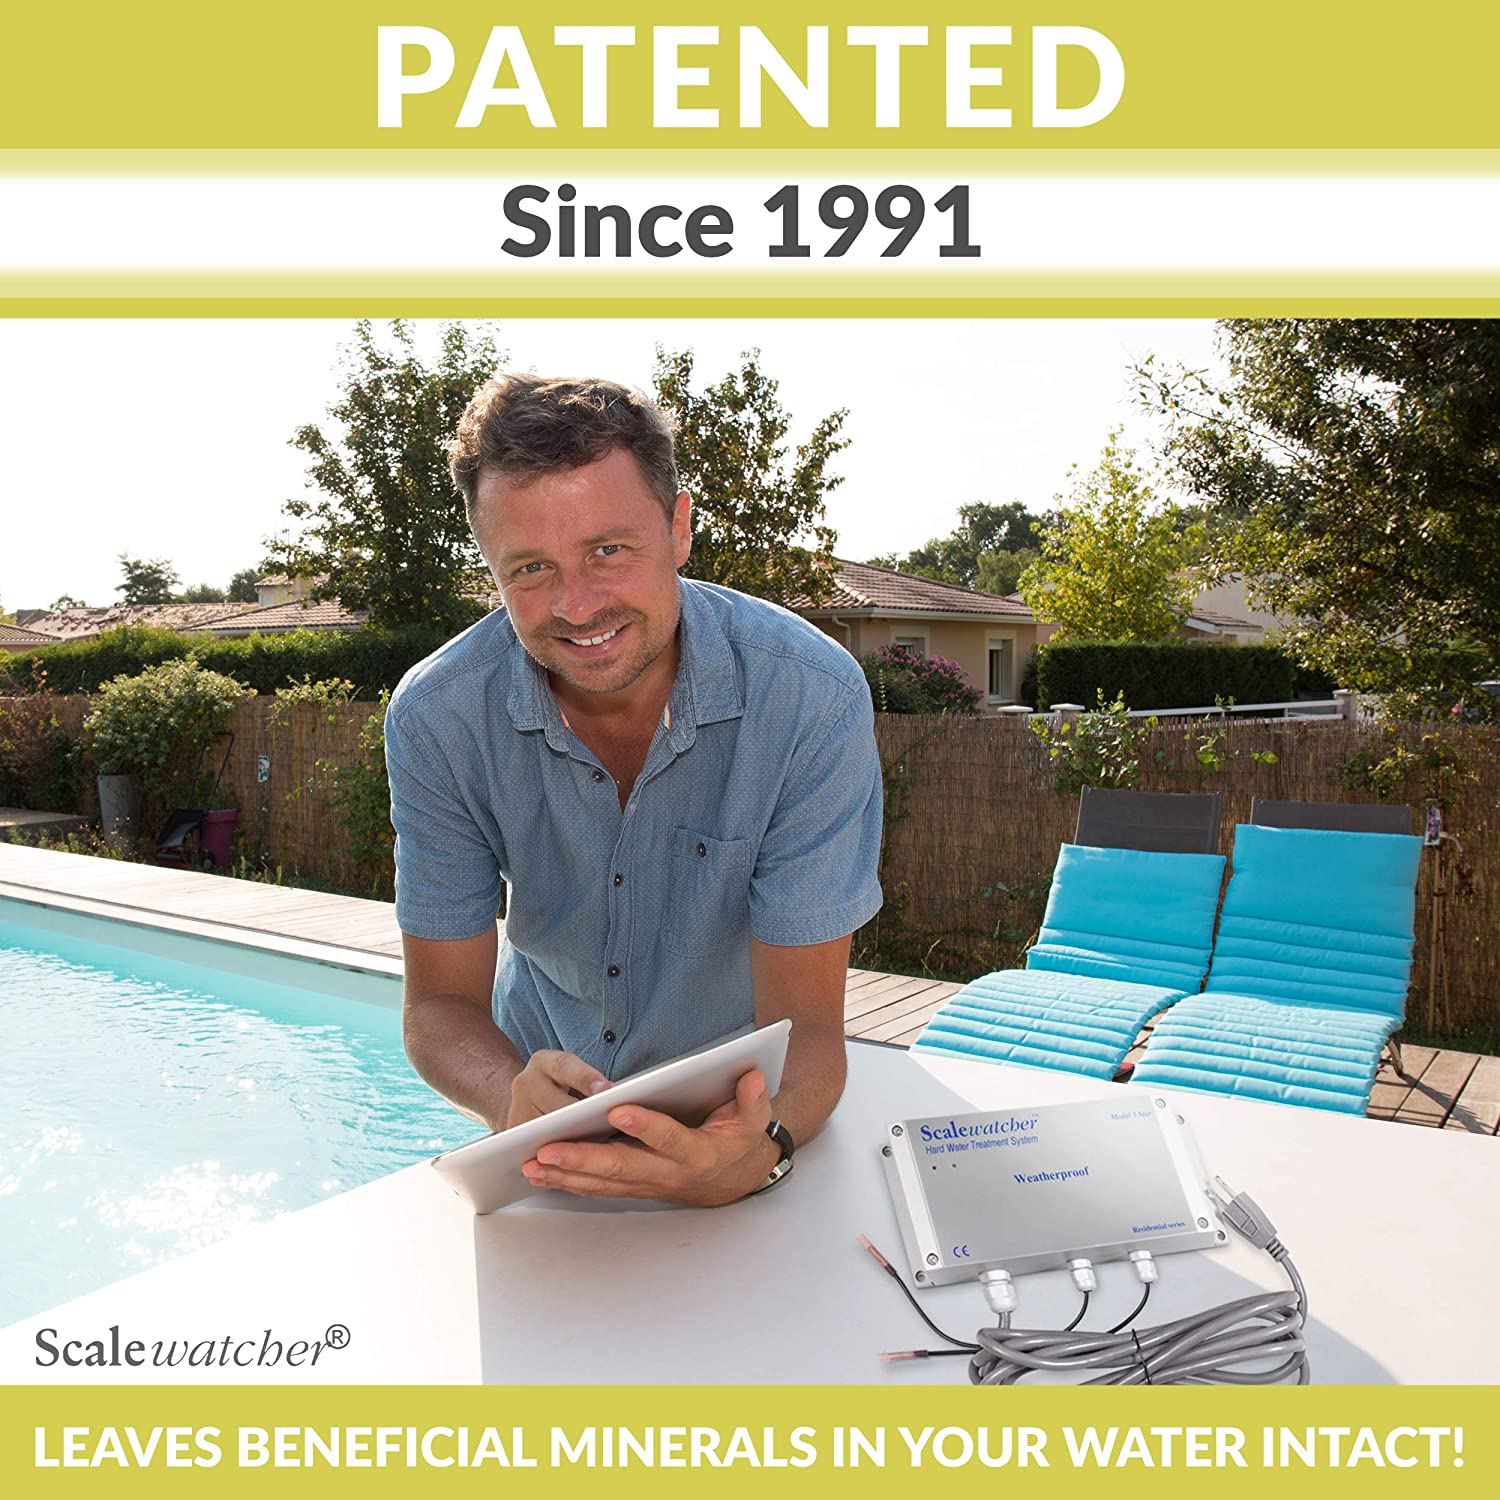 Scalewatcher 5 Electronic Water Softener Conditioner